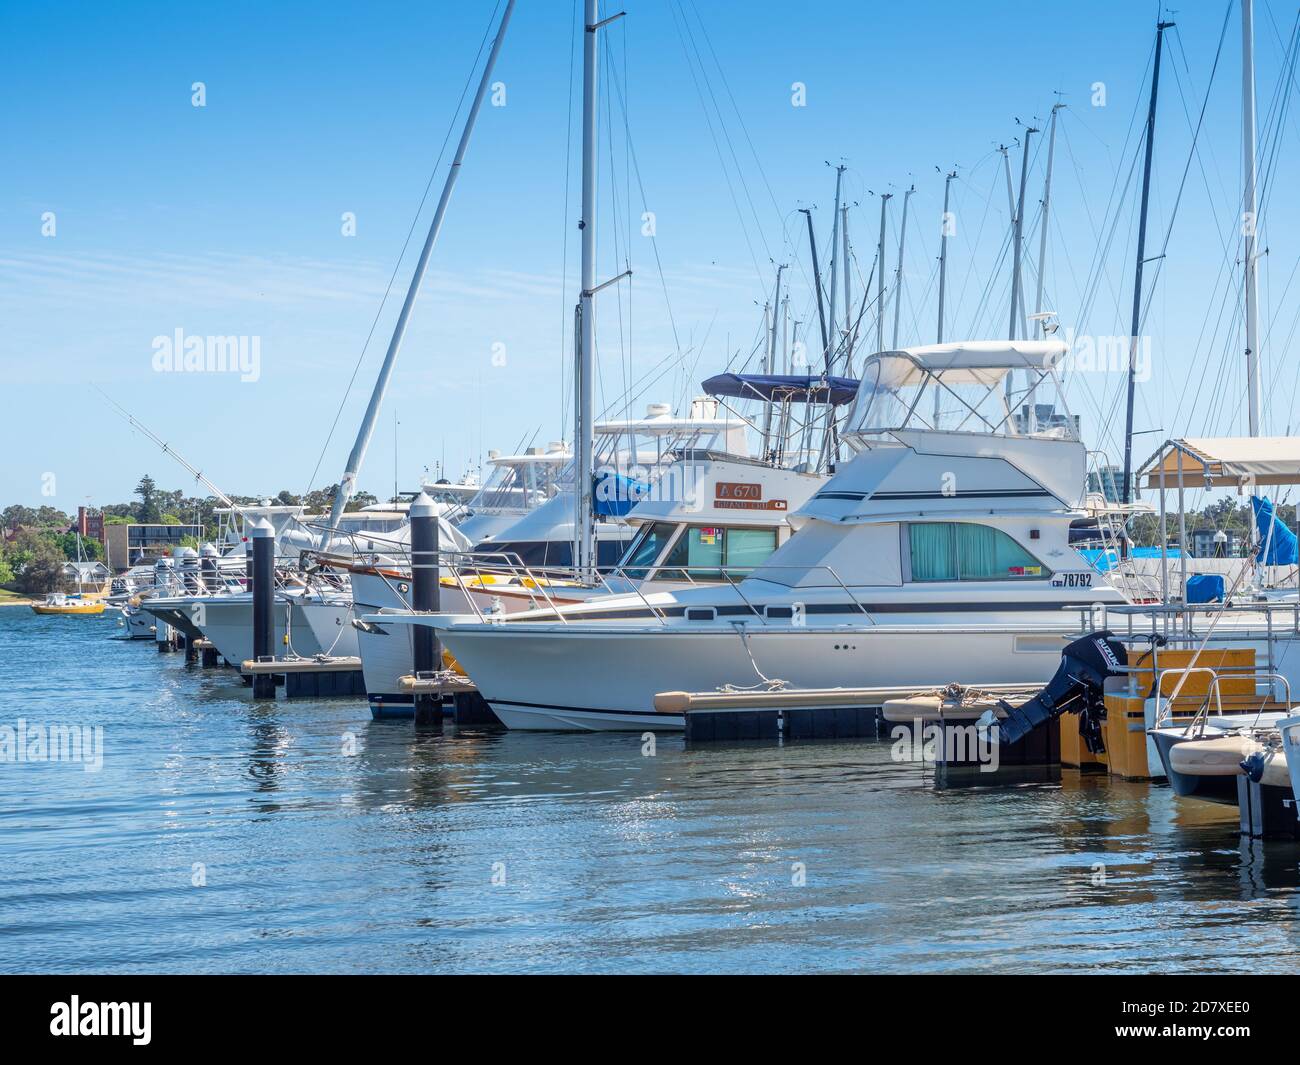 PERTH, WESTERN AUSTRALIA - OCTOBER 25, 2020: Boats lined up at the Royal Perth Yacht Club in Perth, Western Australia. Stock Photo